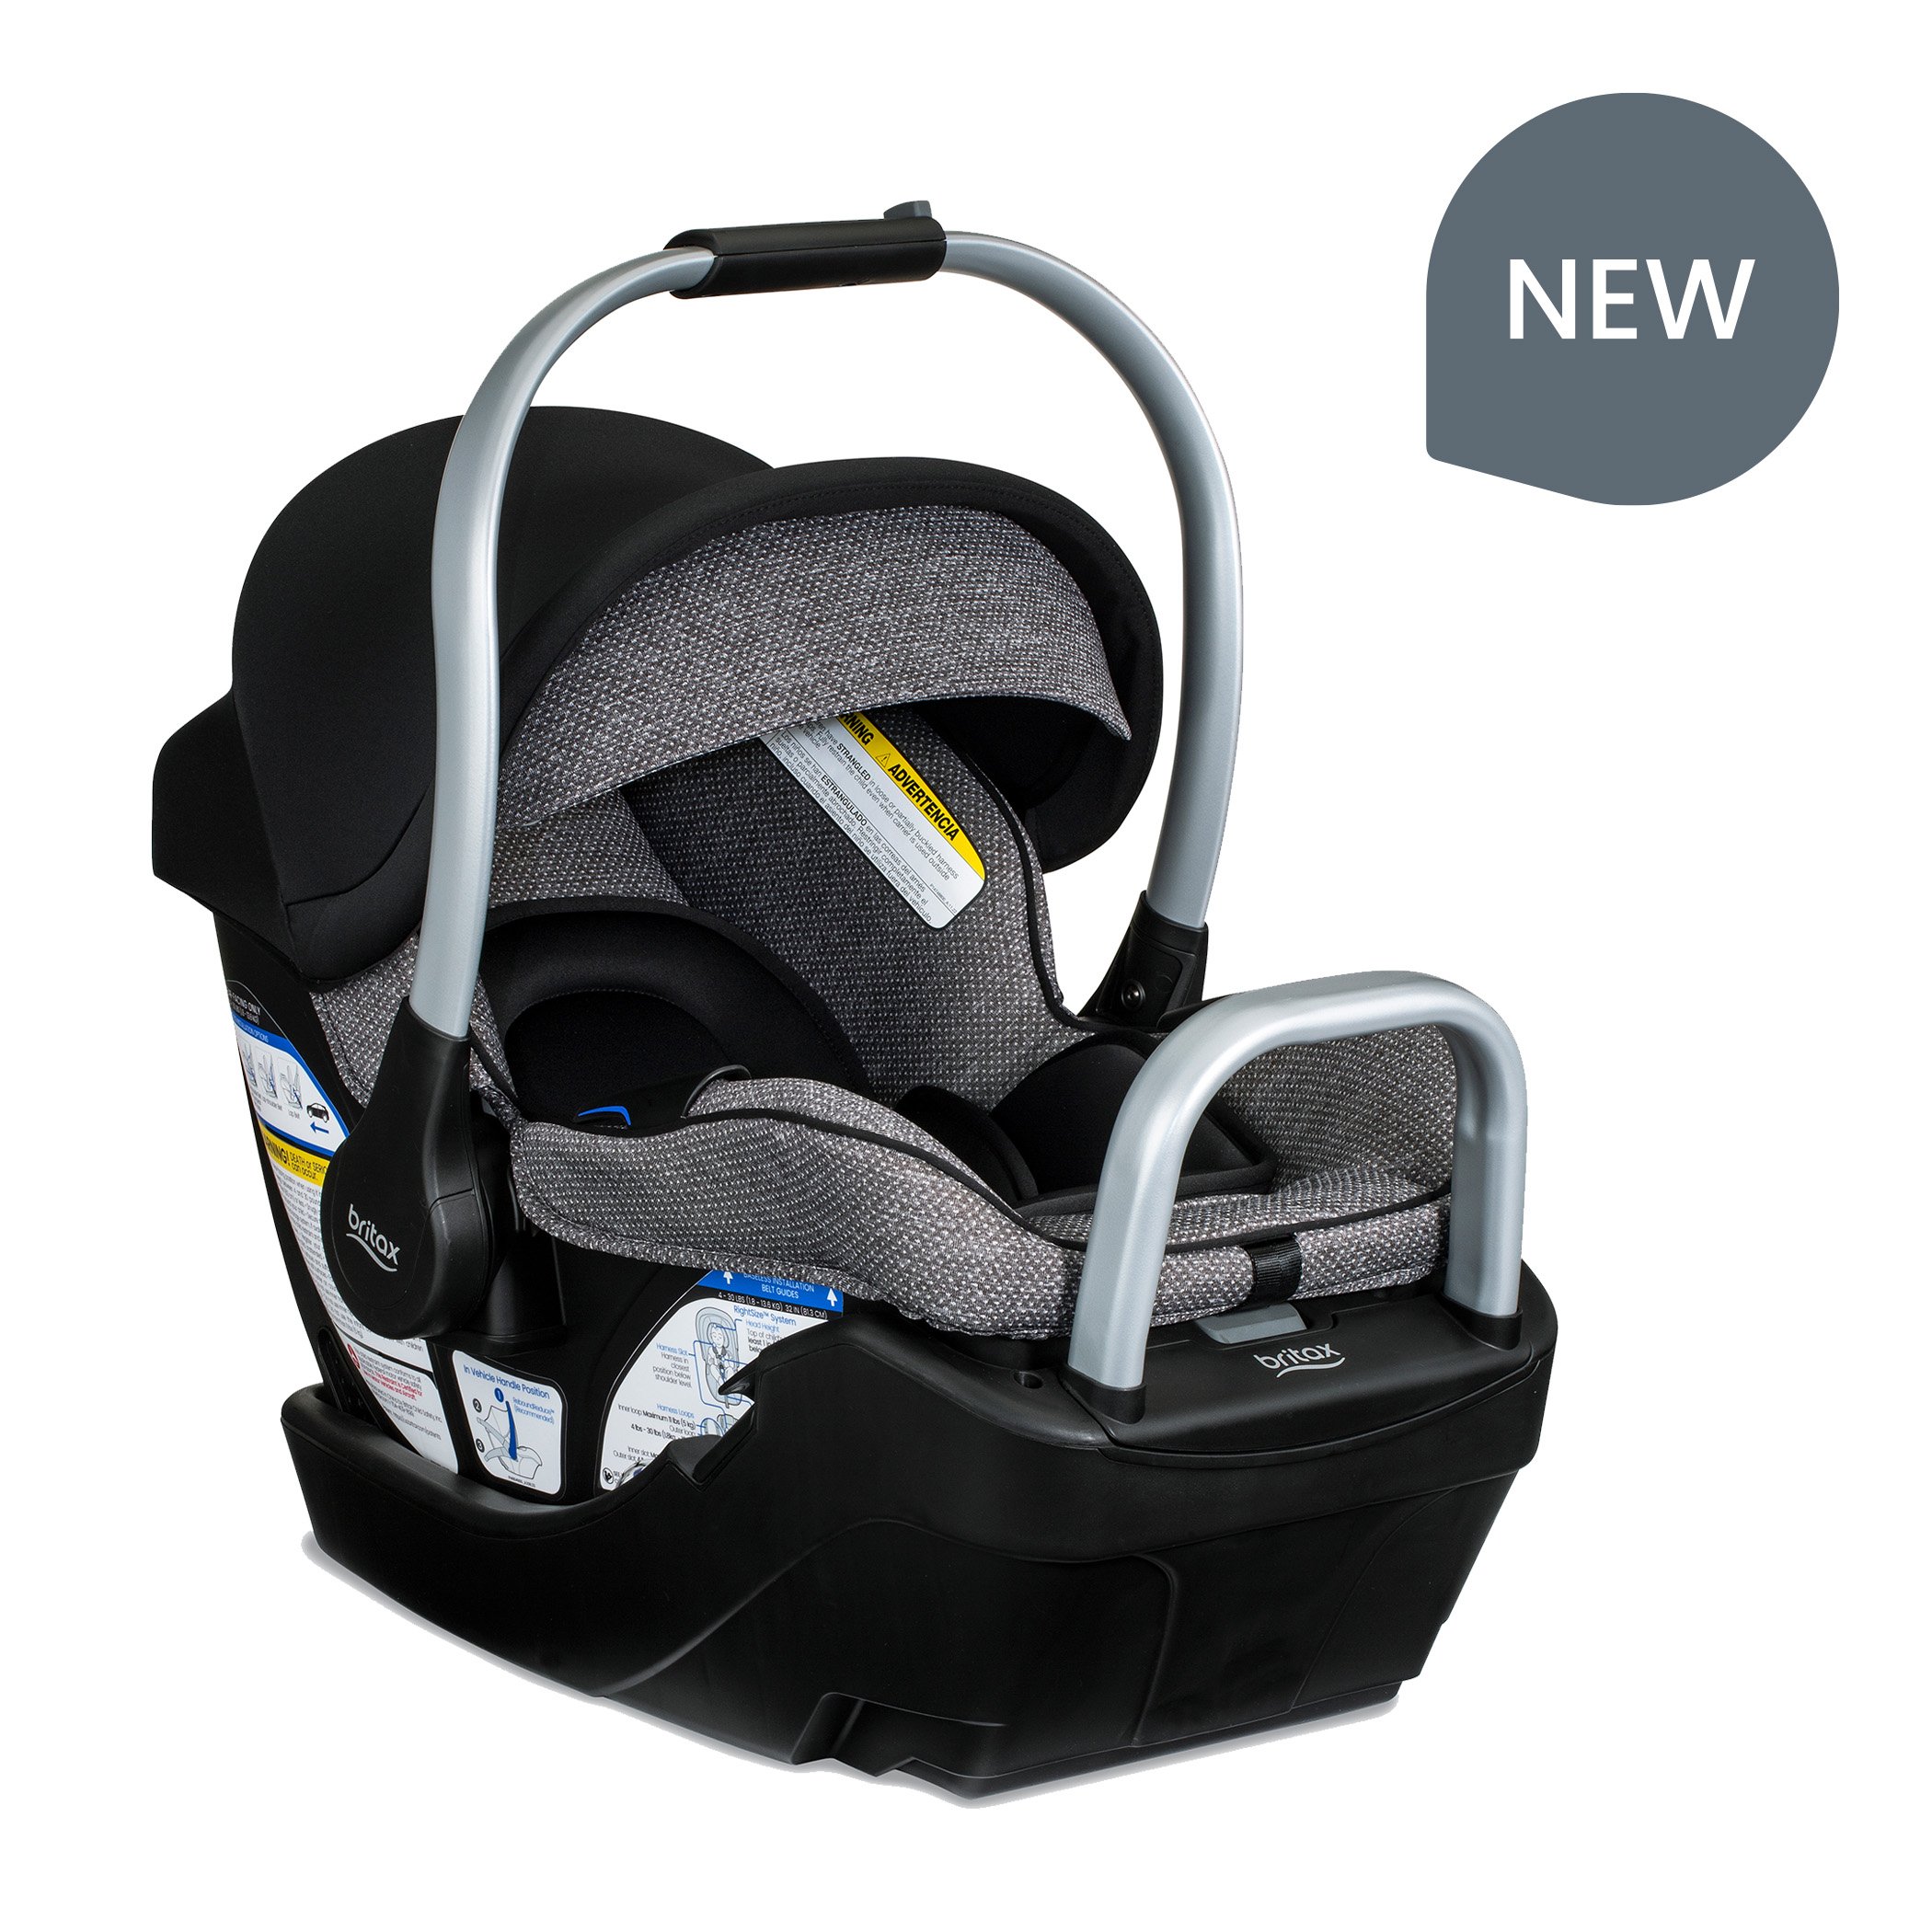  NEW Pindot Onyx Willow S Infant Car Seat  (Copy)